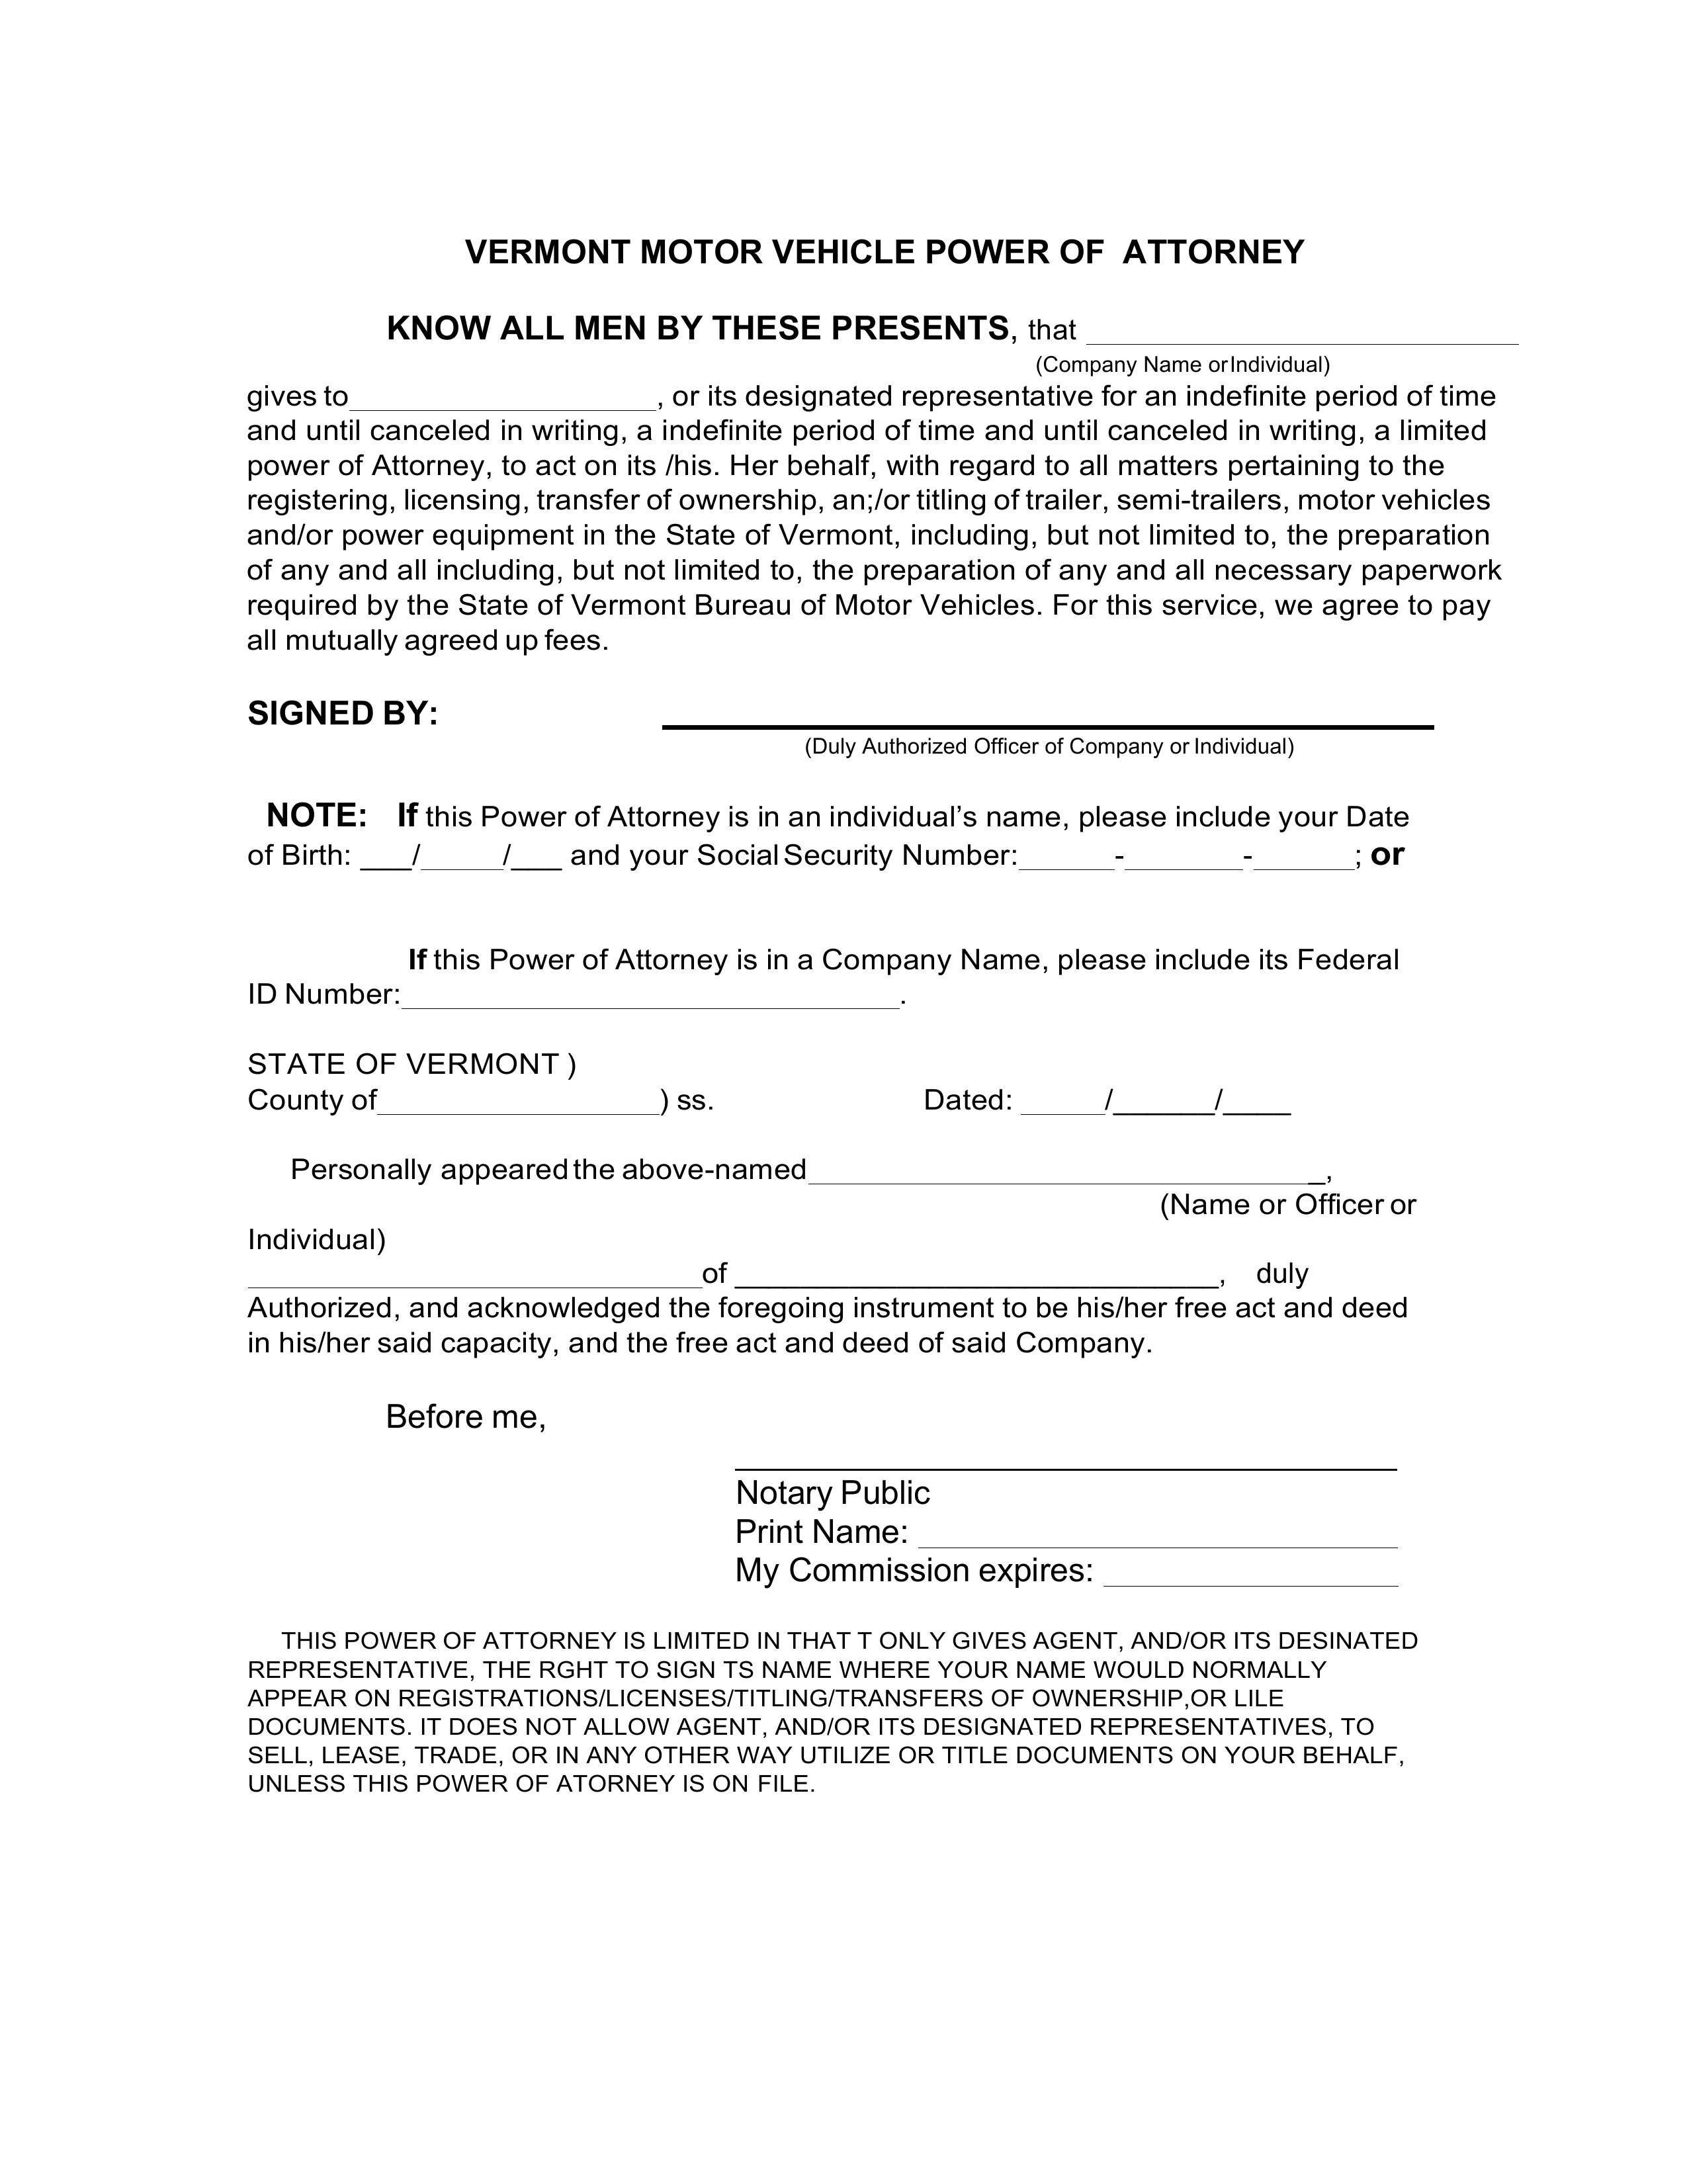 Vermont Motor Vehicle Power of Attorney Form